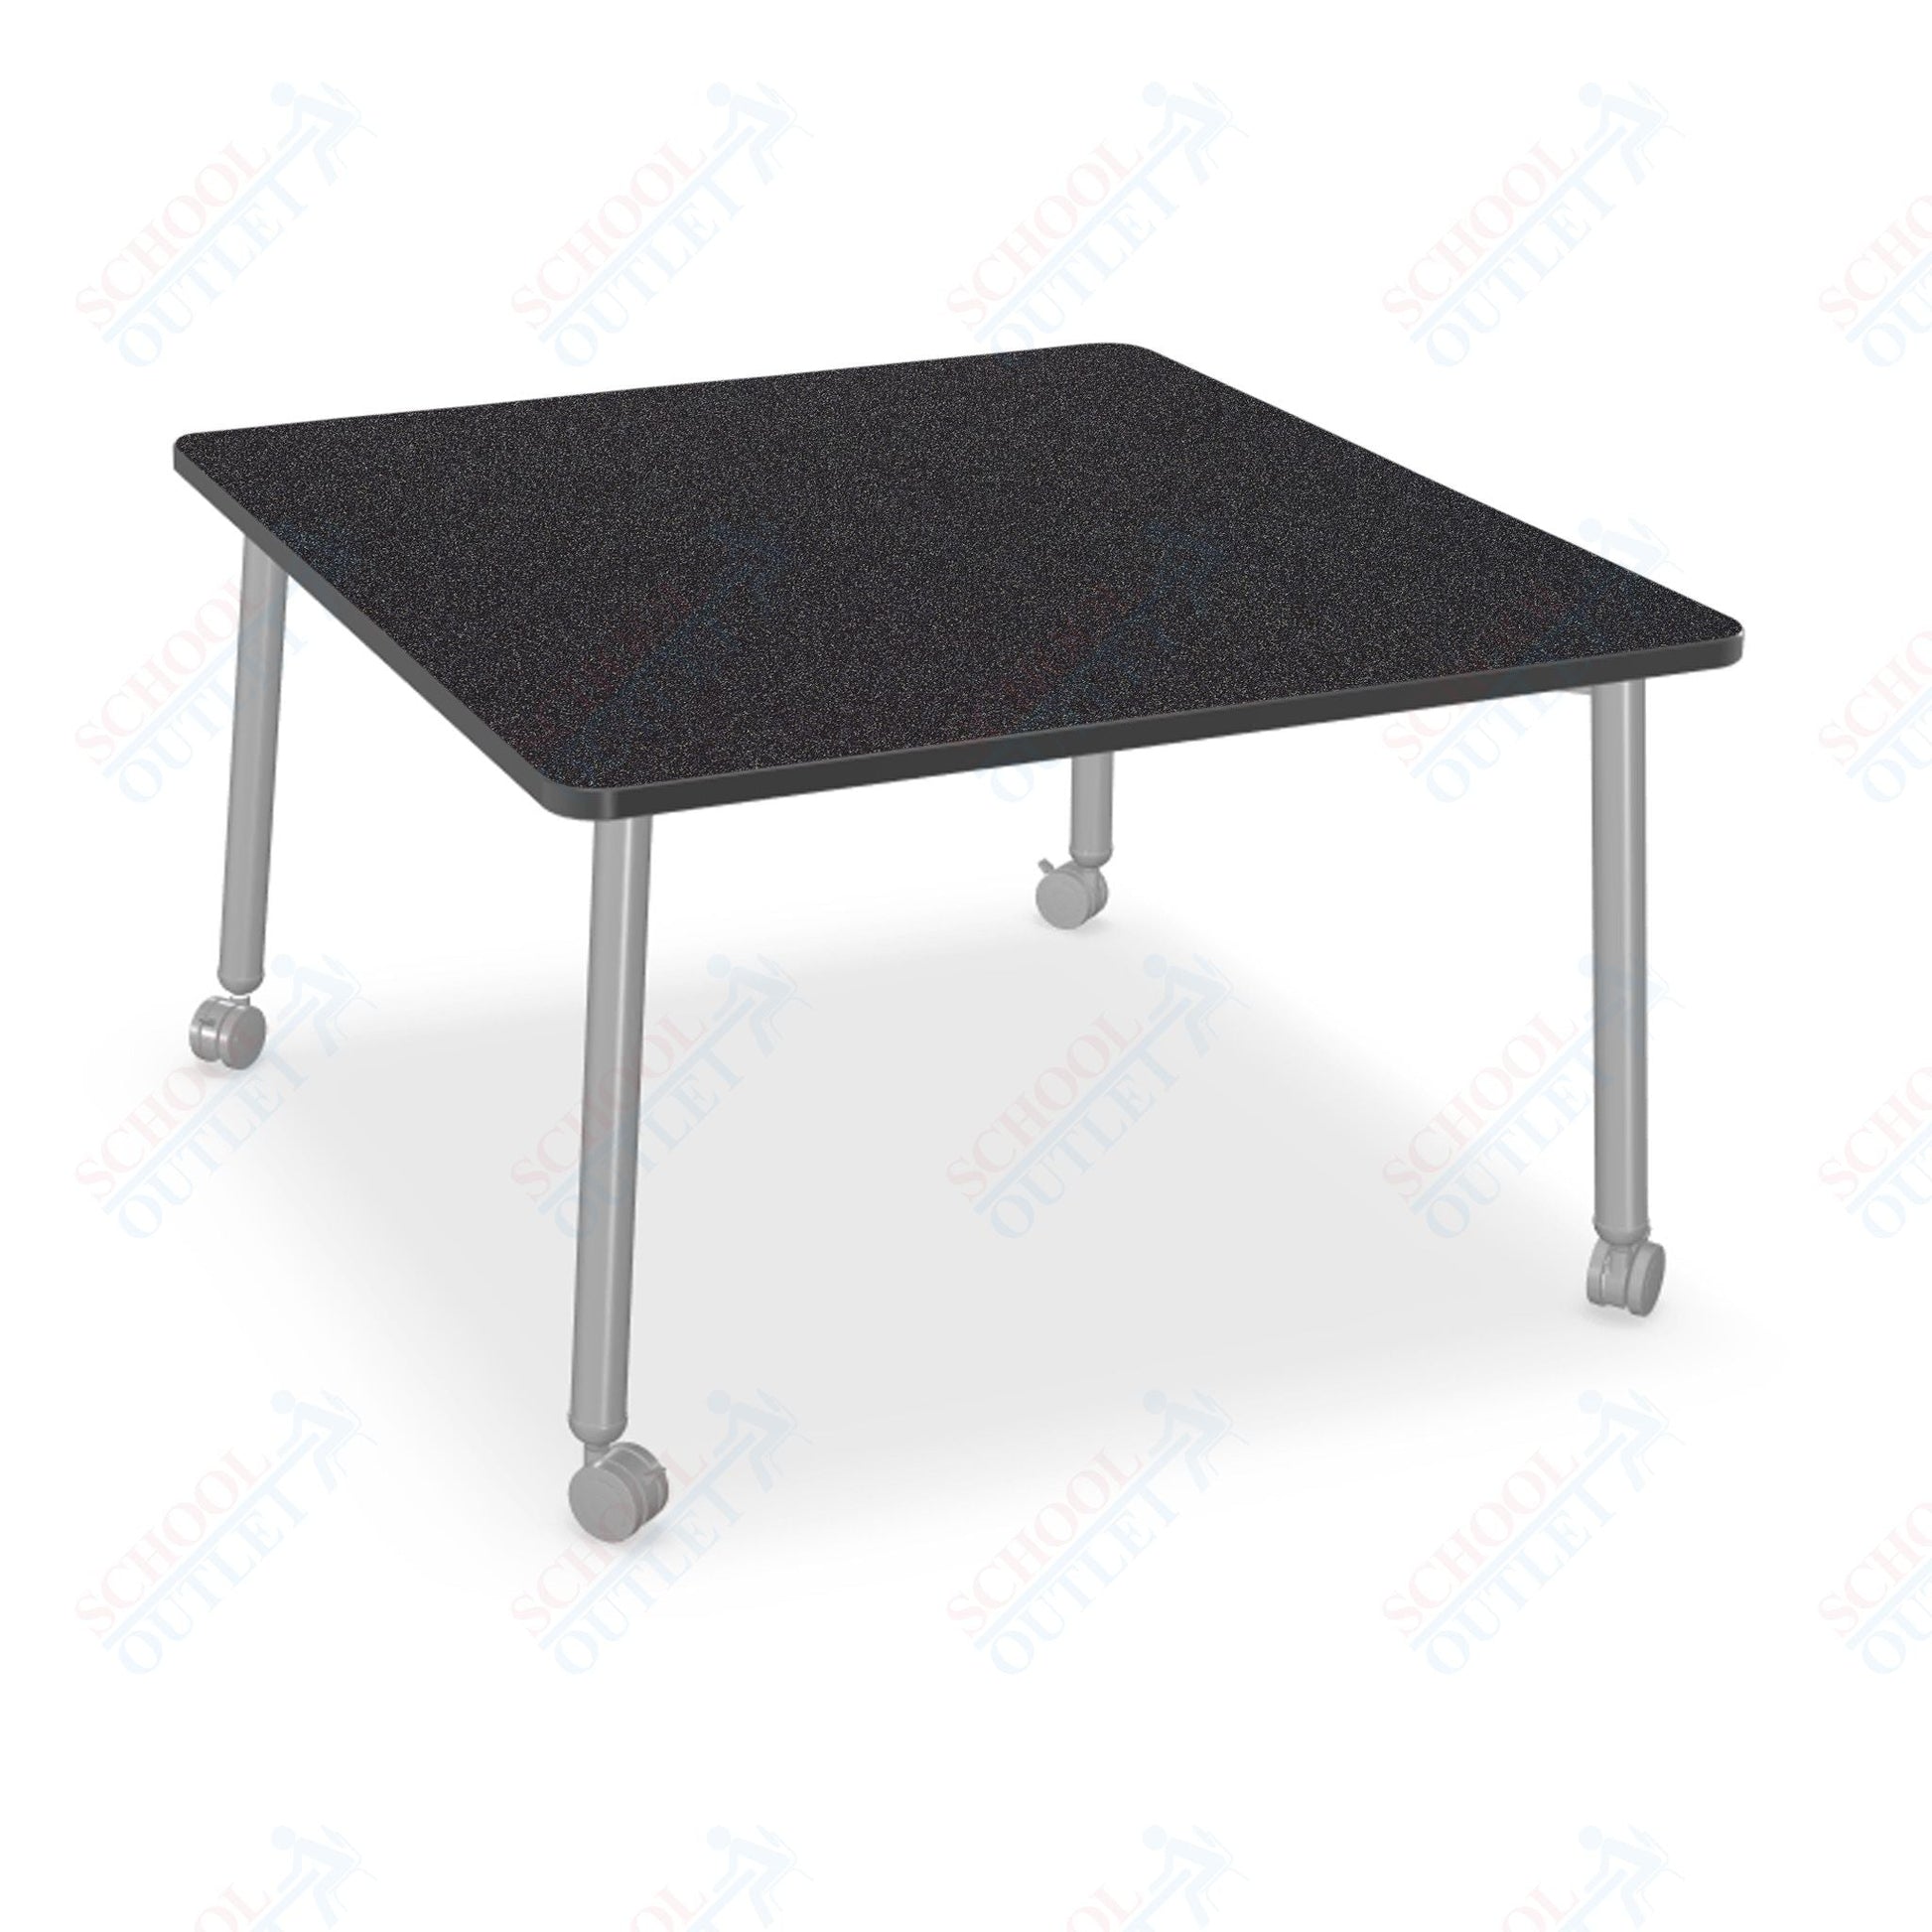 Mooreco Akt Table – 48" Square, Laminate Top, Fixed Height Available in 29"H, 36"H, or 42"H - SchoolOutlet